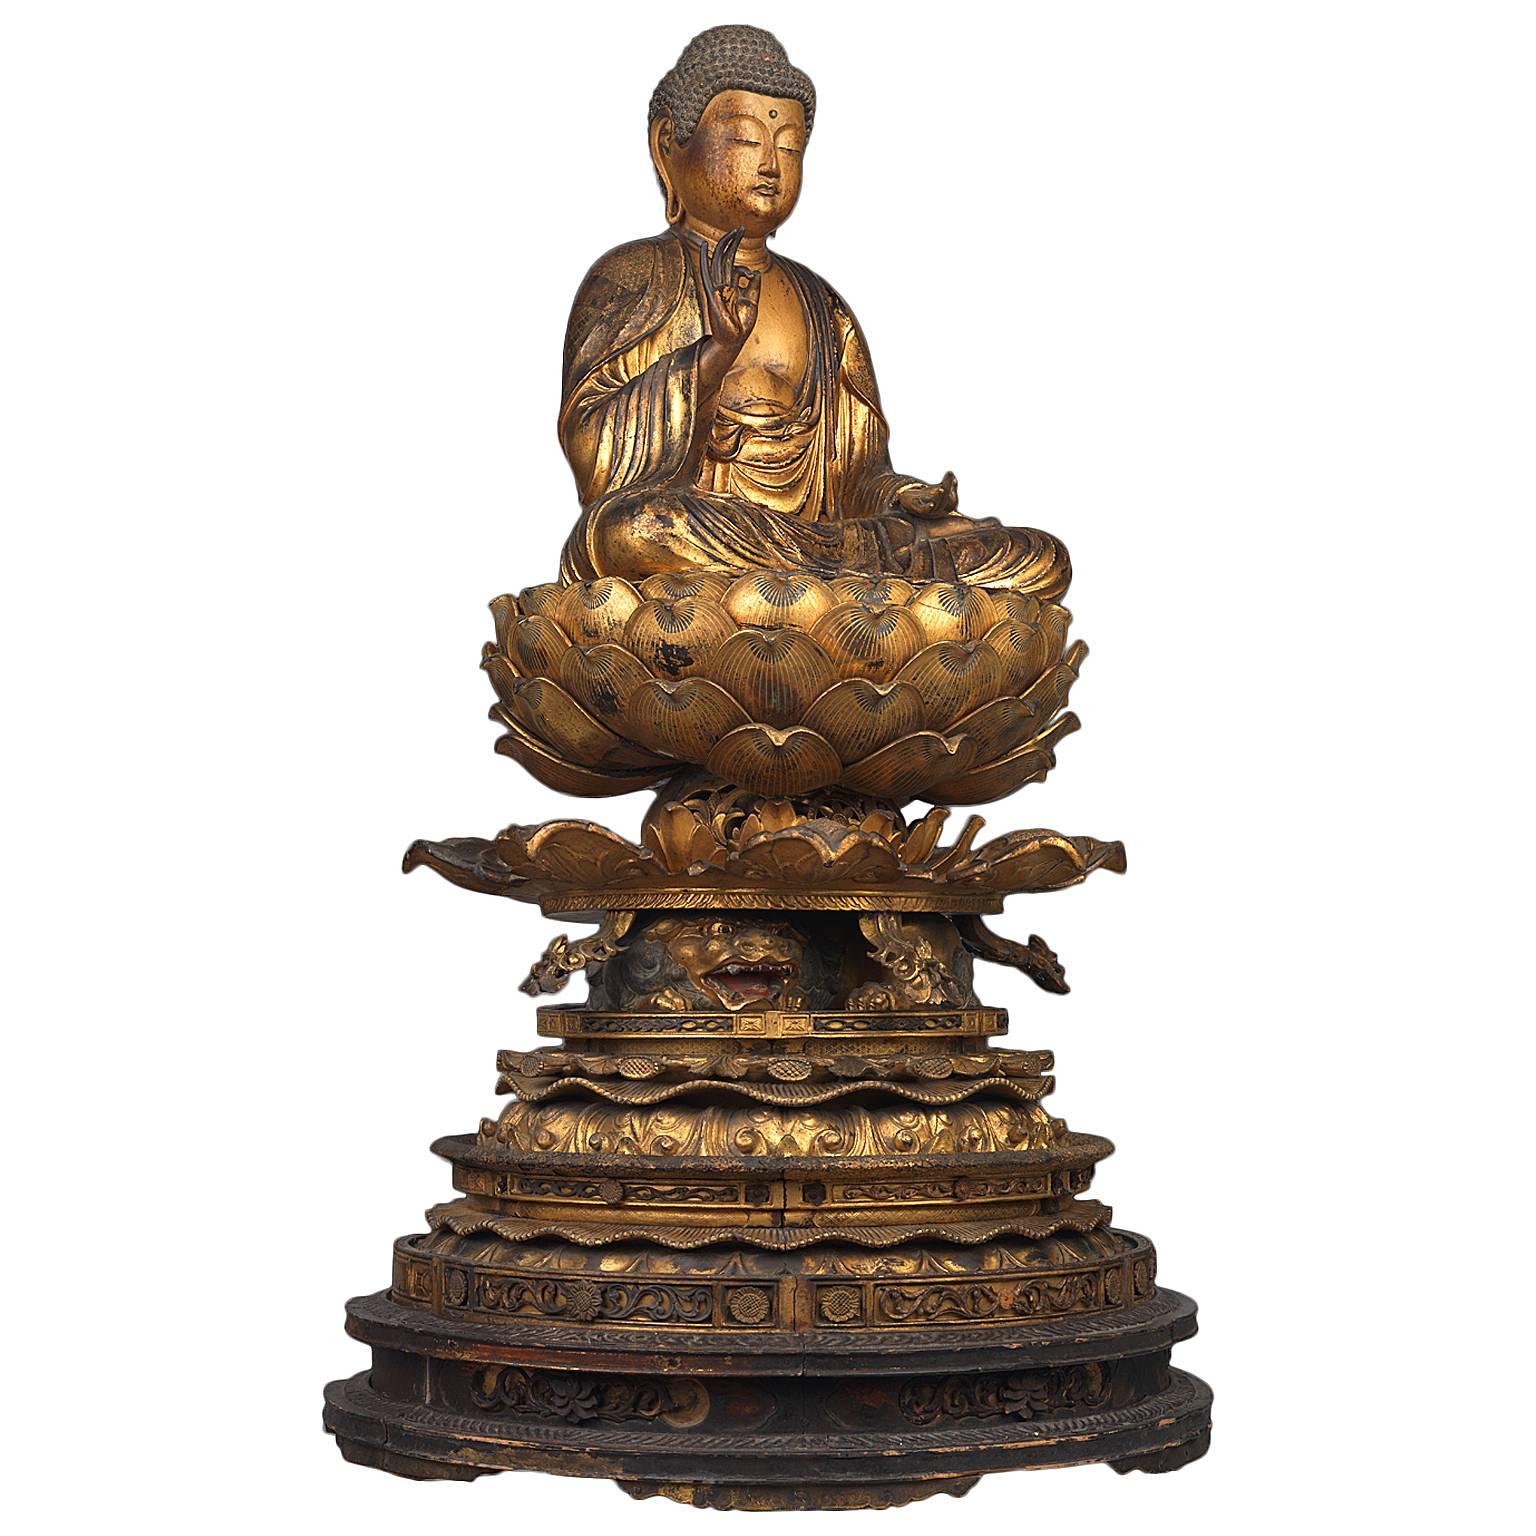 Gold lacquered wood with Kirikane decoration, seated Amida Nyorai (AMITABHA).
Kamakura period.

Sold with The Radio-Carbon Dating certificate.

Provenance:

Property from the collection of The Baroness Lydia Dunn.

She has led a